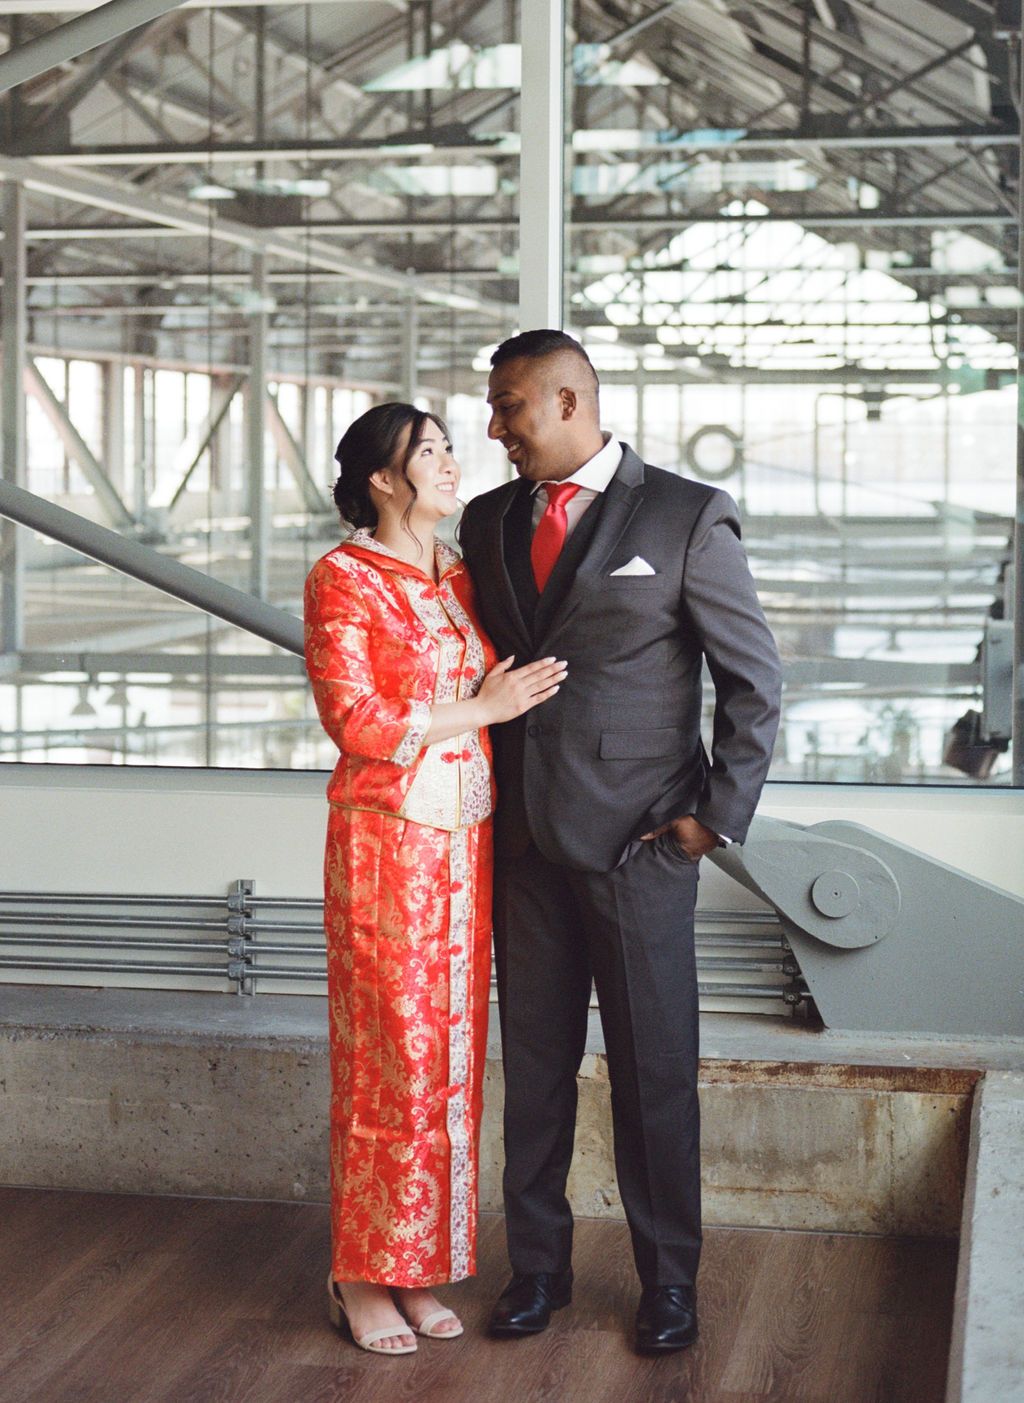  Multicultural wedding inspiration in Vancouver, bride and groom attire with bright red accents